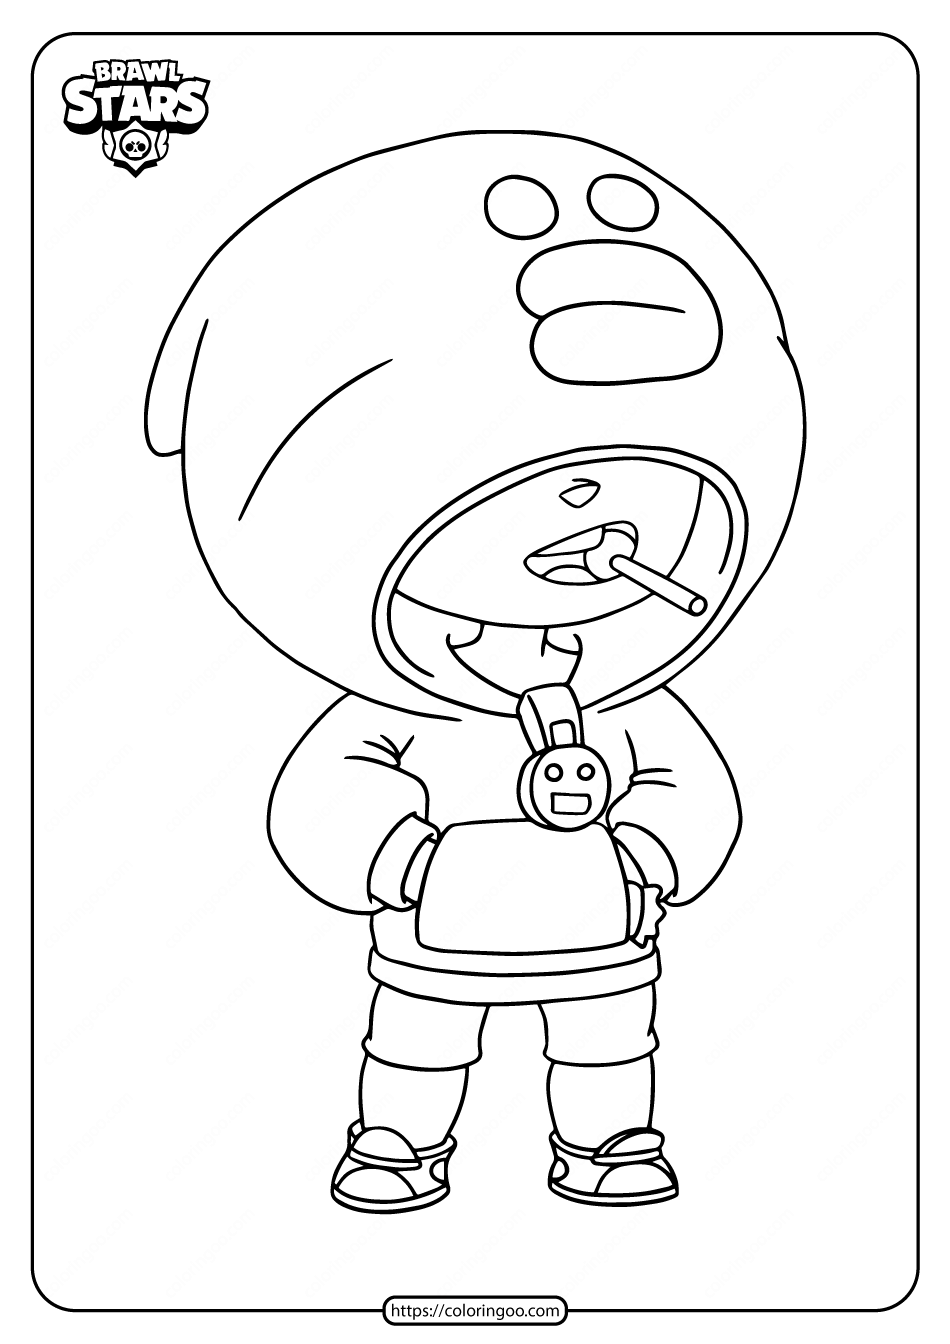 free printable brawl stars leon coloring pages